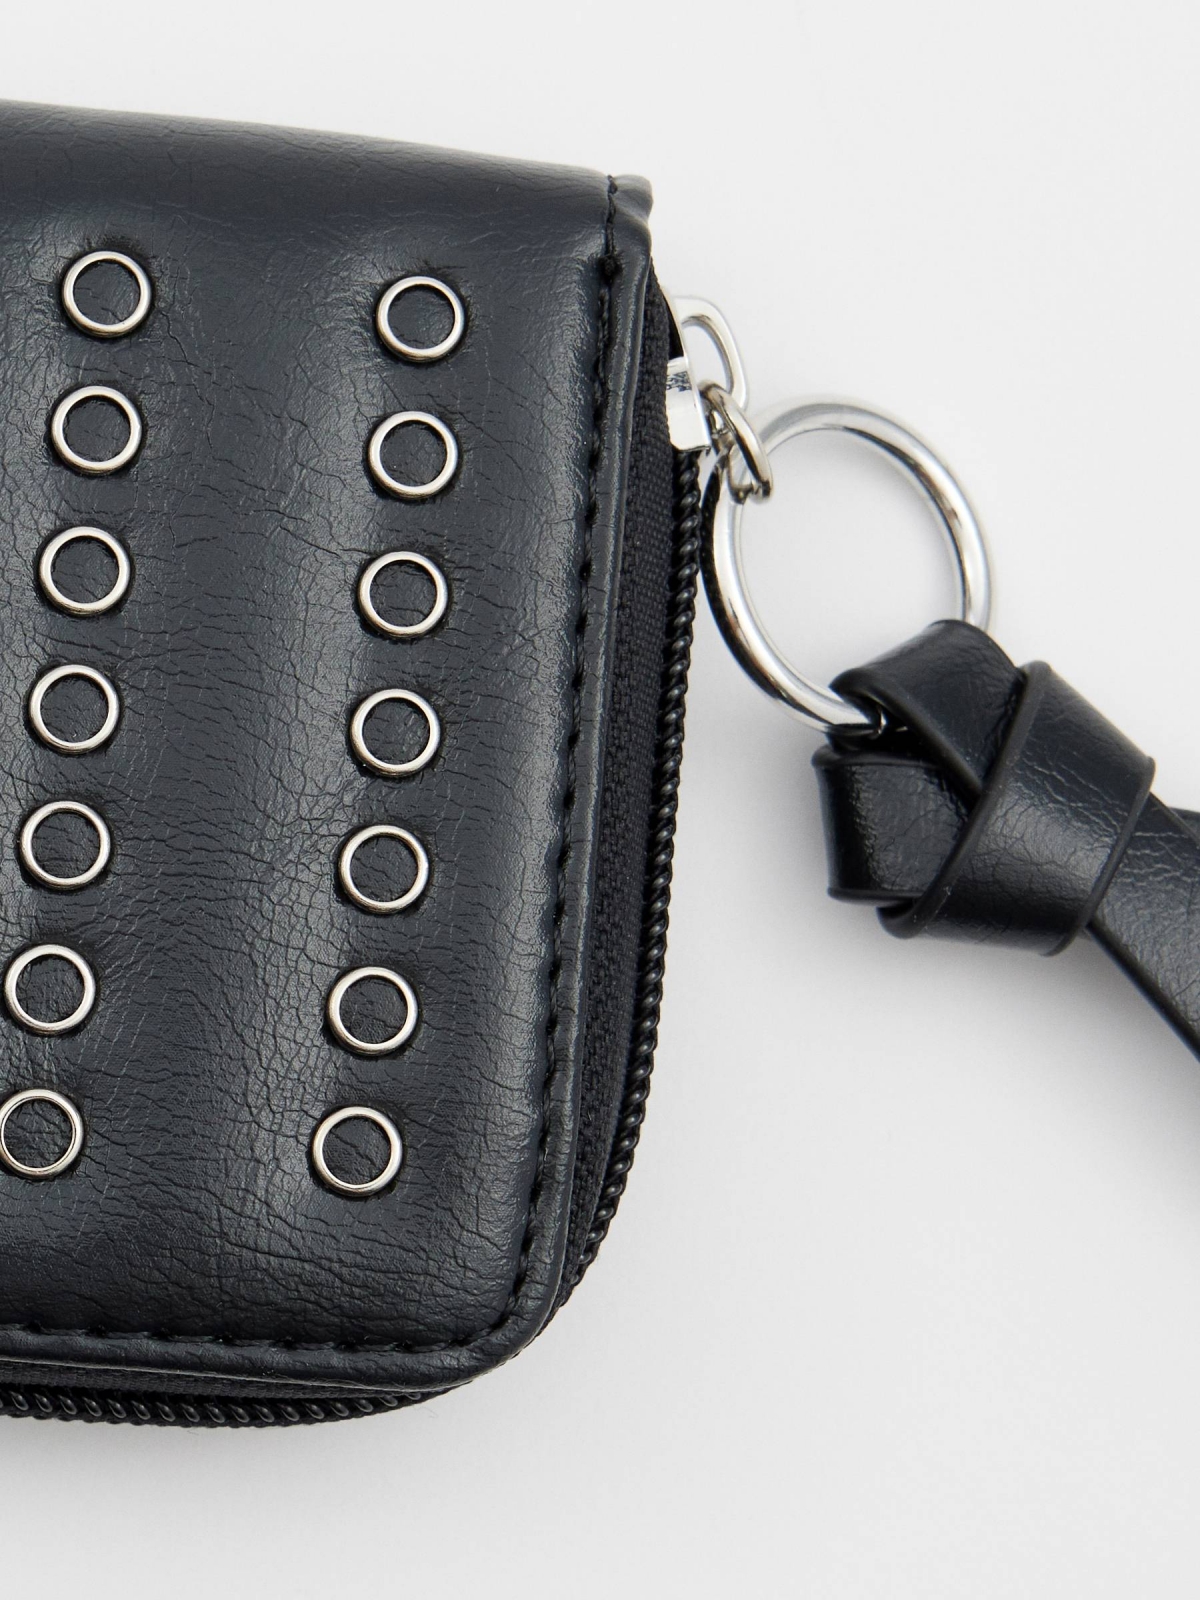 Studded leather effect purse black 45º side view